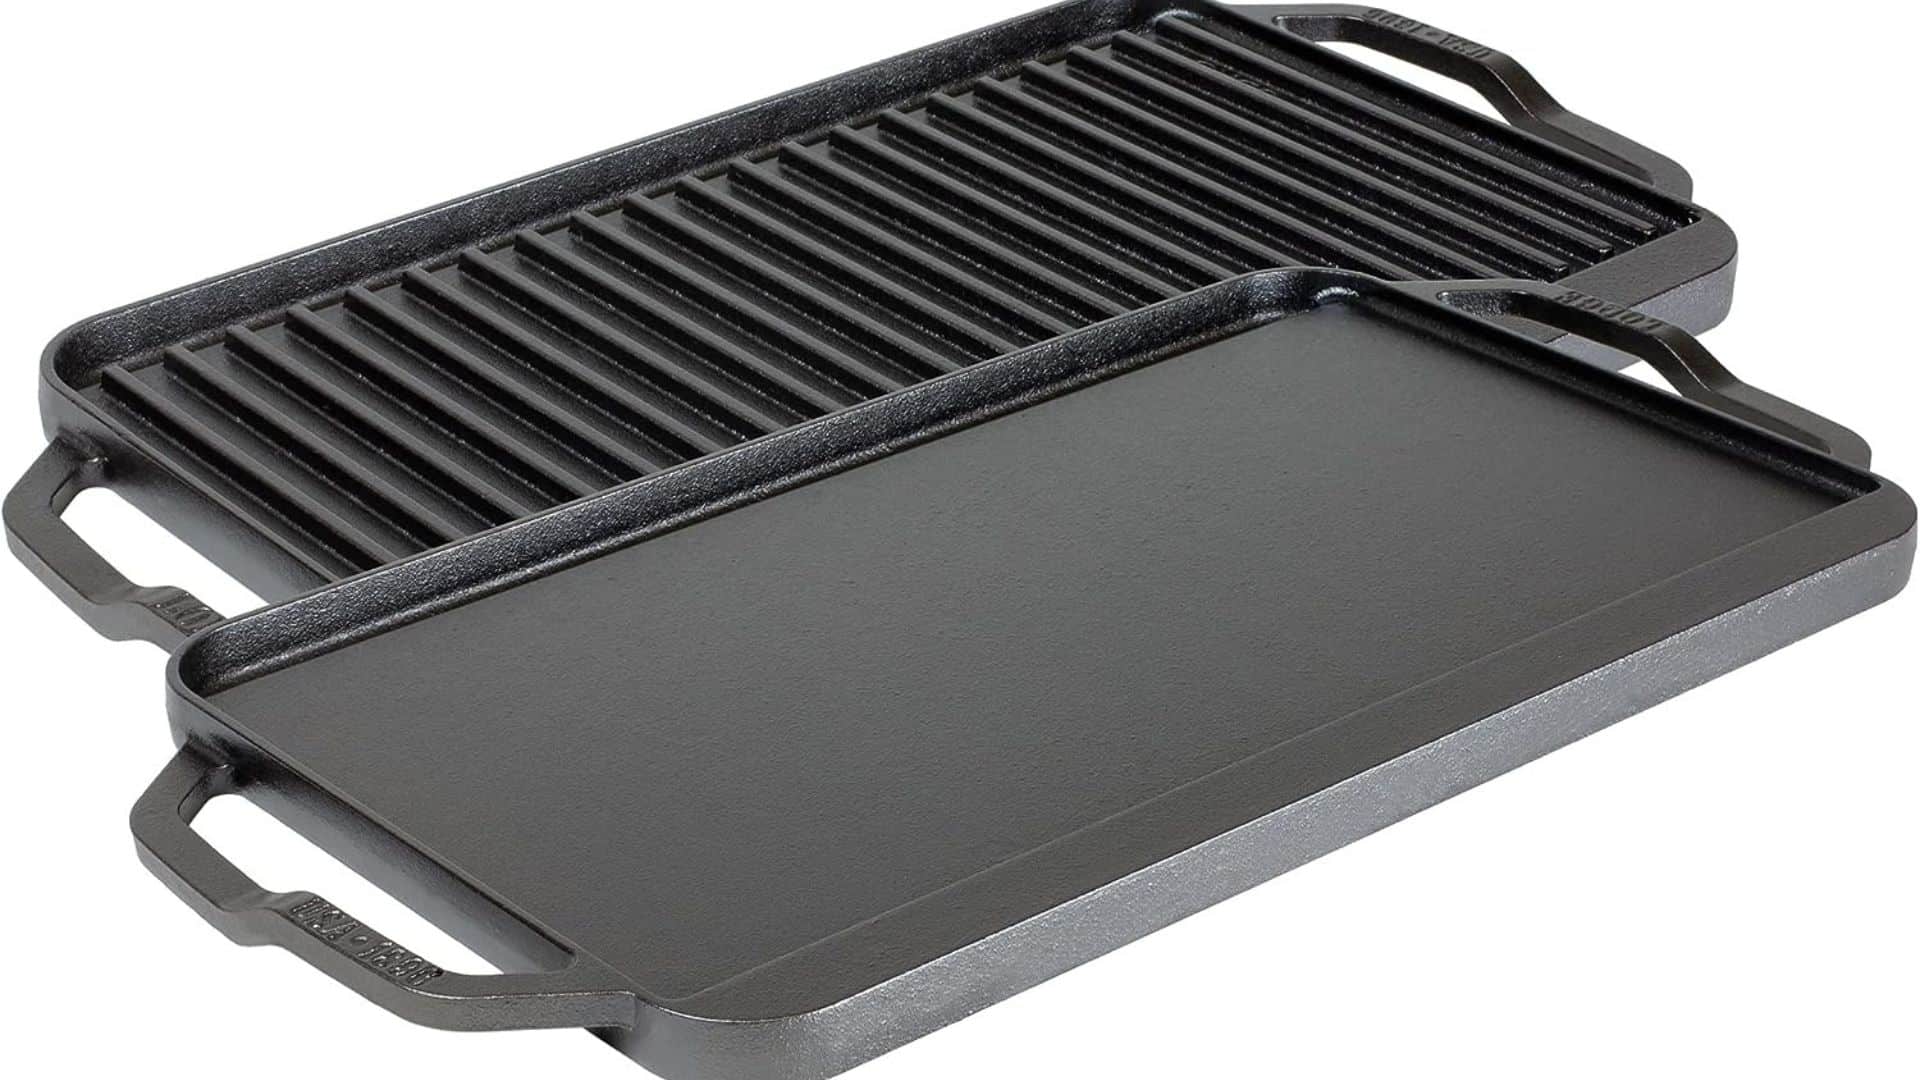 The best cast iron griddles: Lodge reversible 